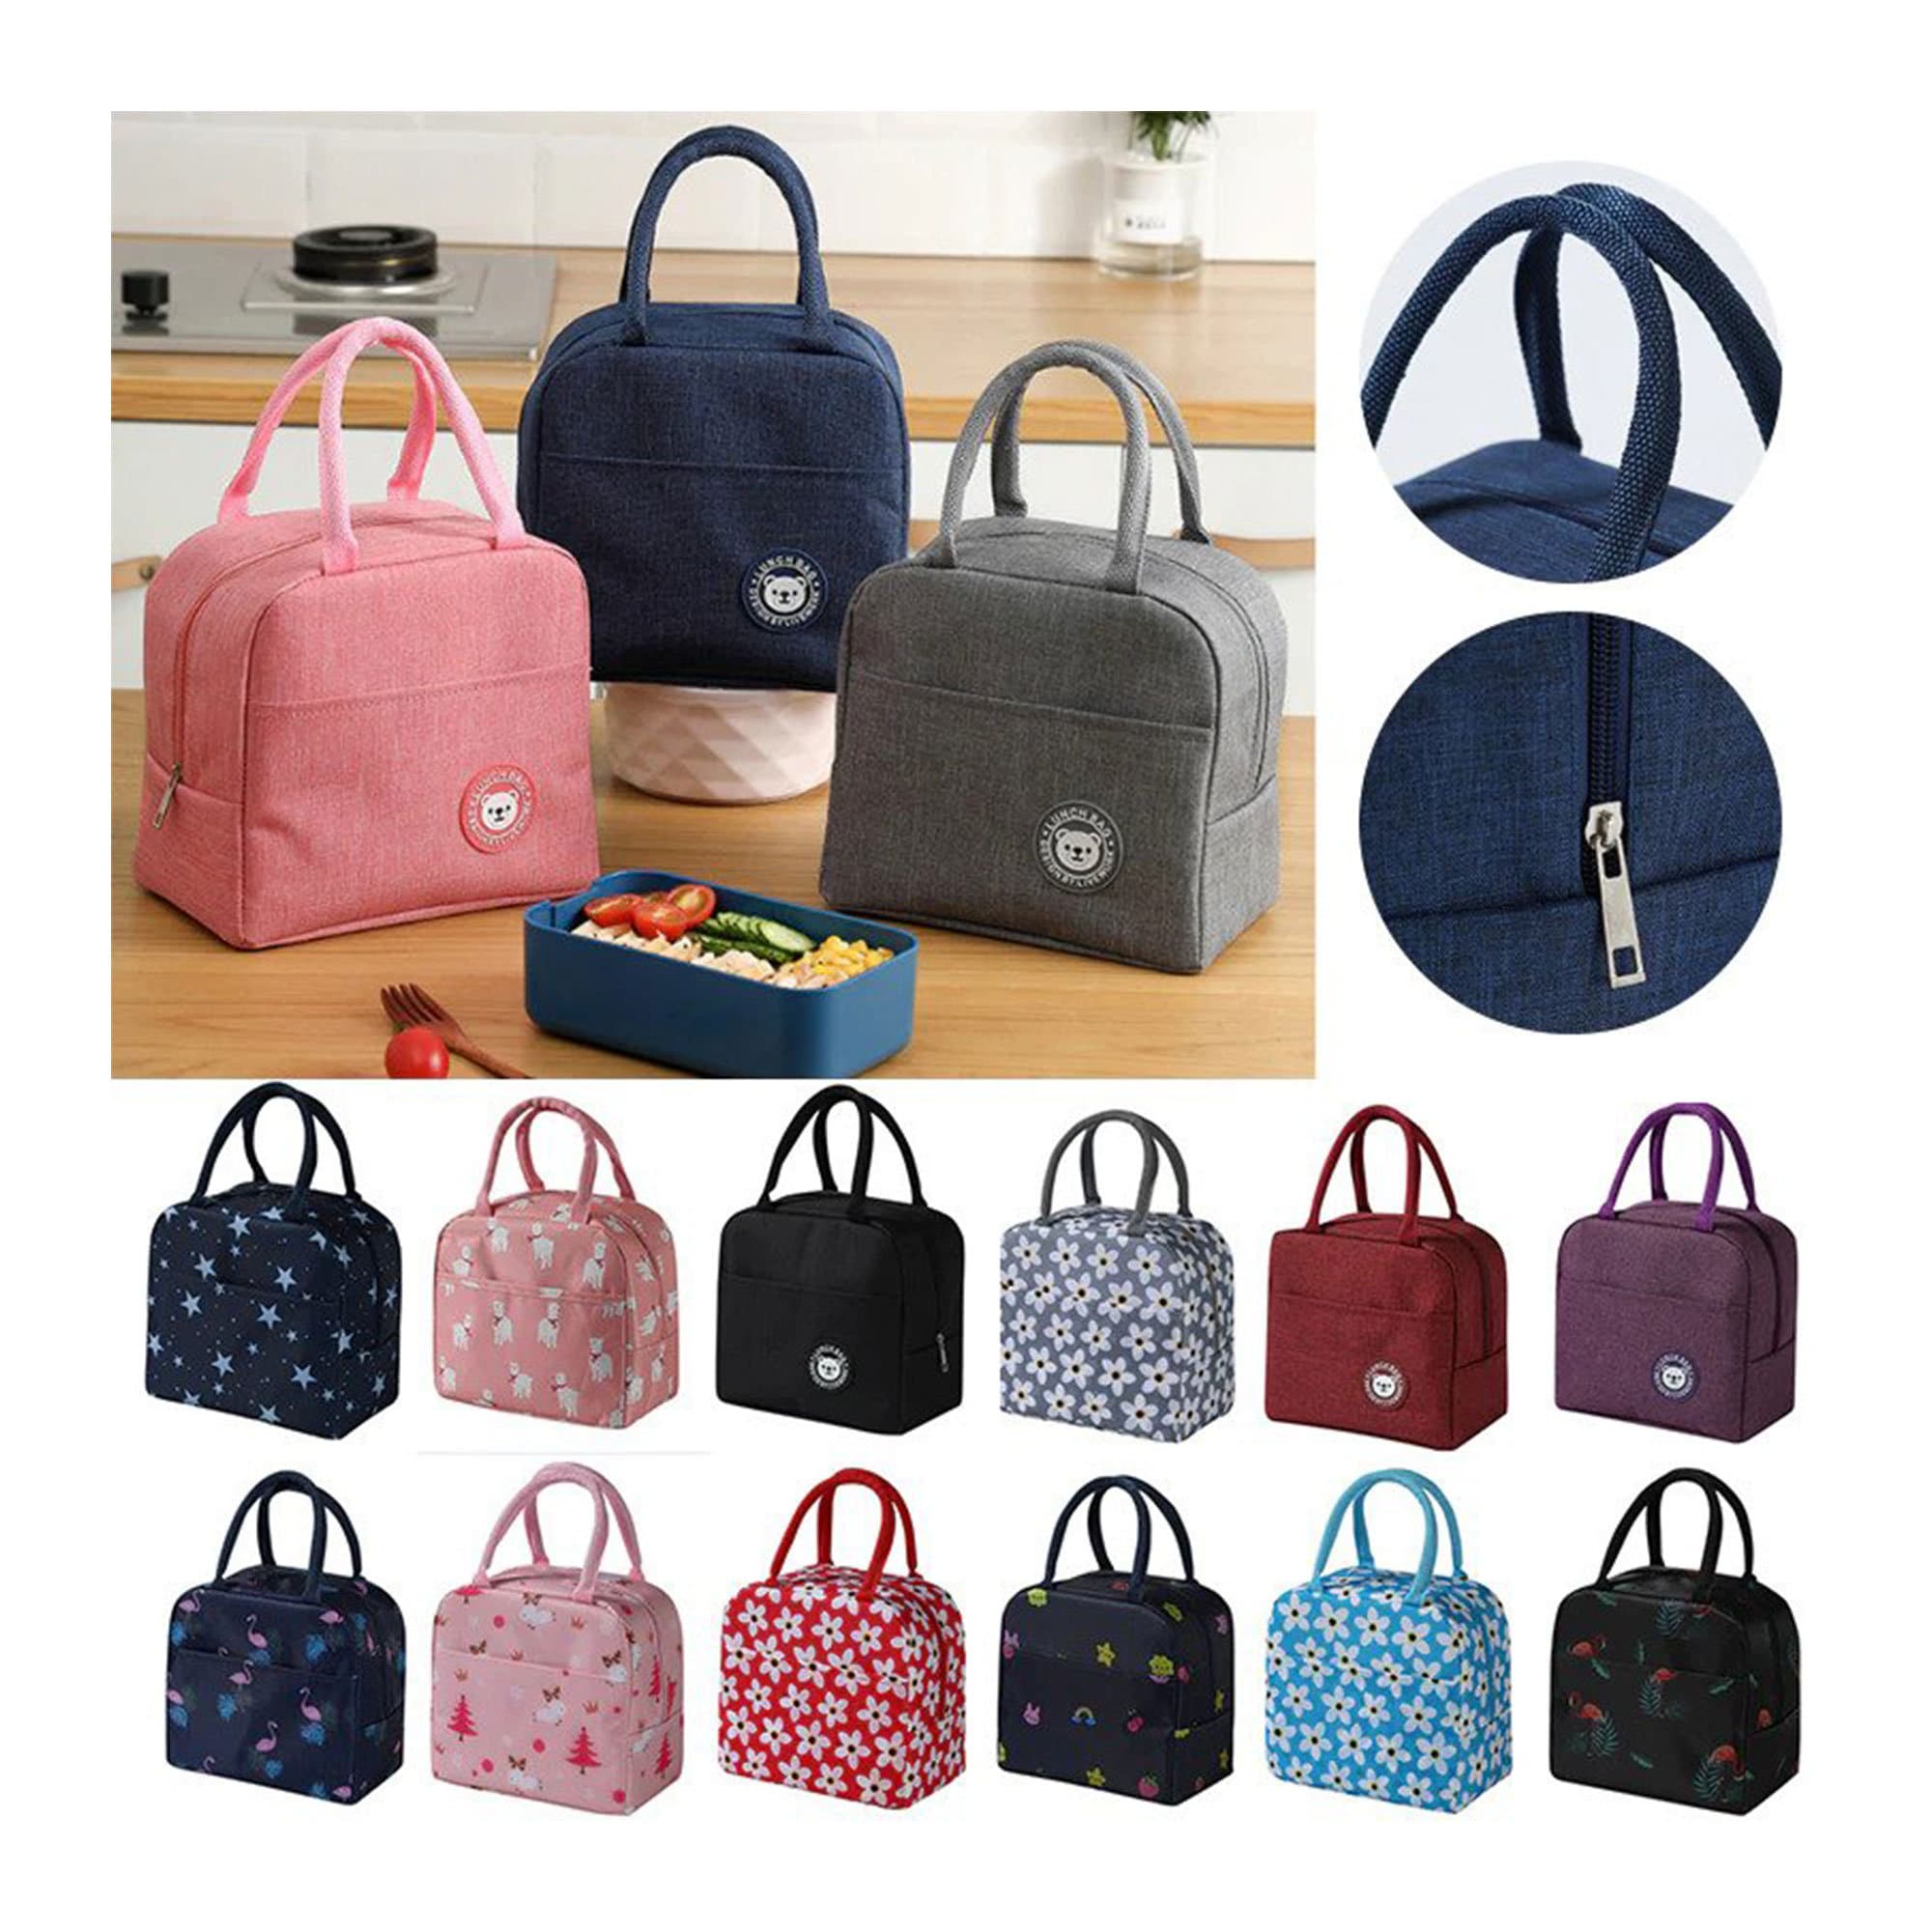 Children Kids Adults Lunch Bags Insulated Cool Bag Picnic Bag